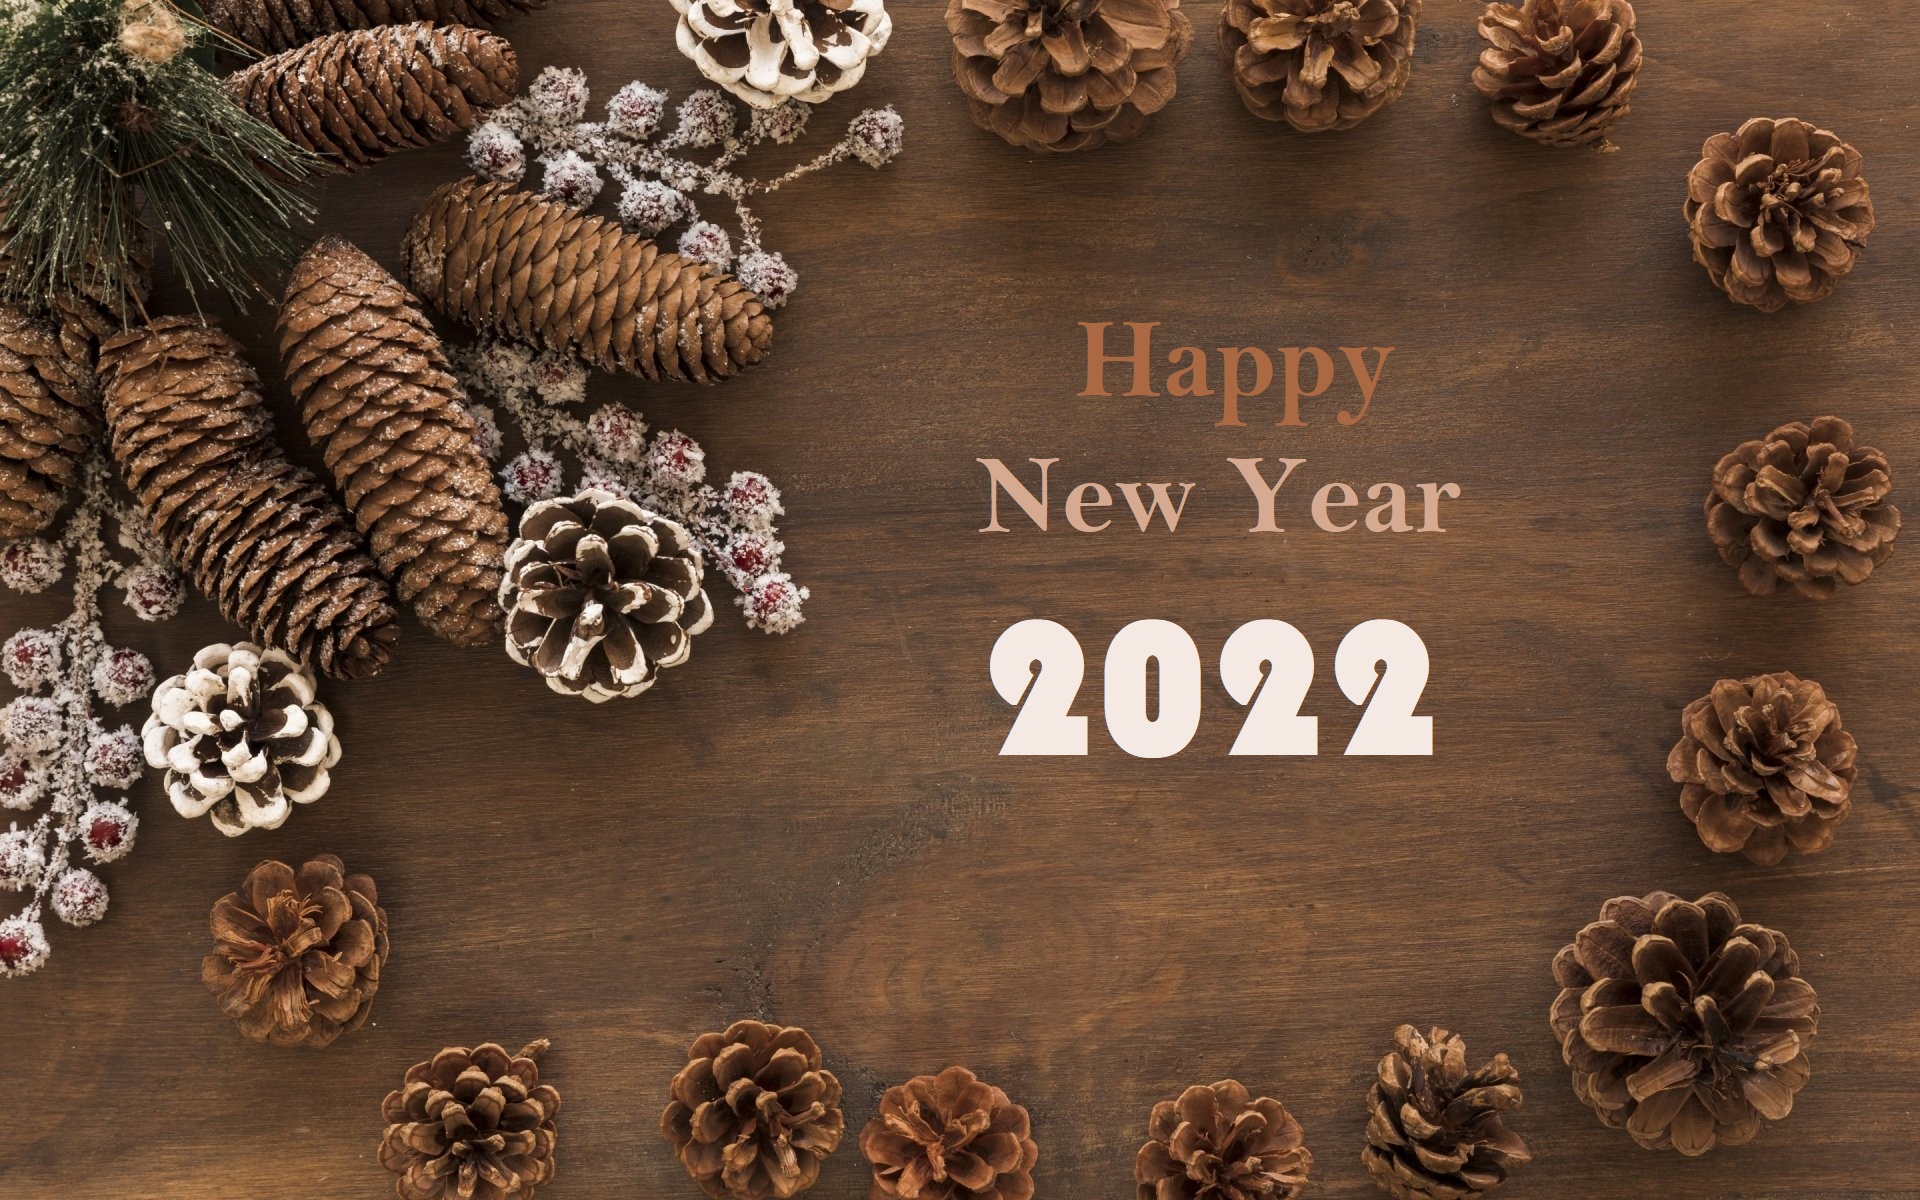 holiday, new year 2022, happy new year, pine cone